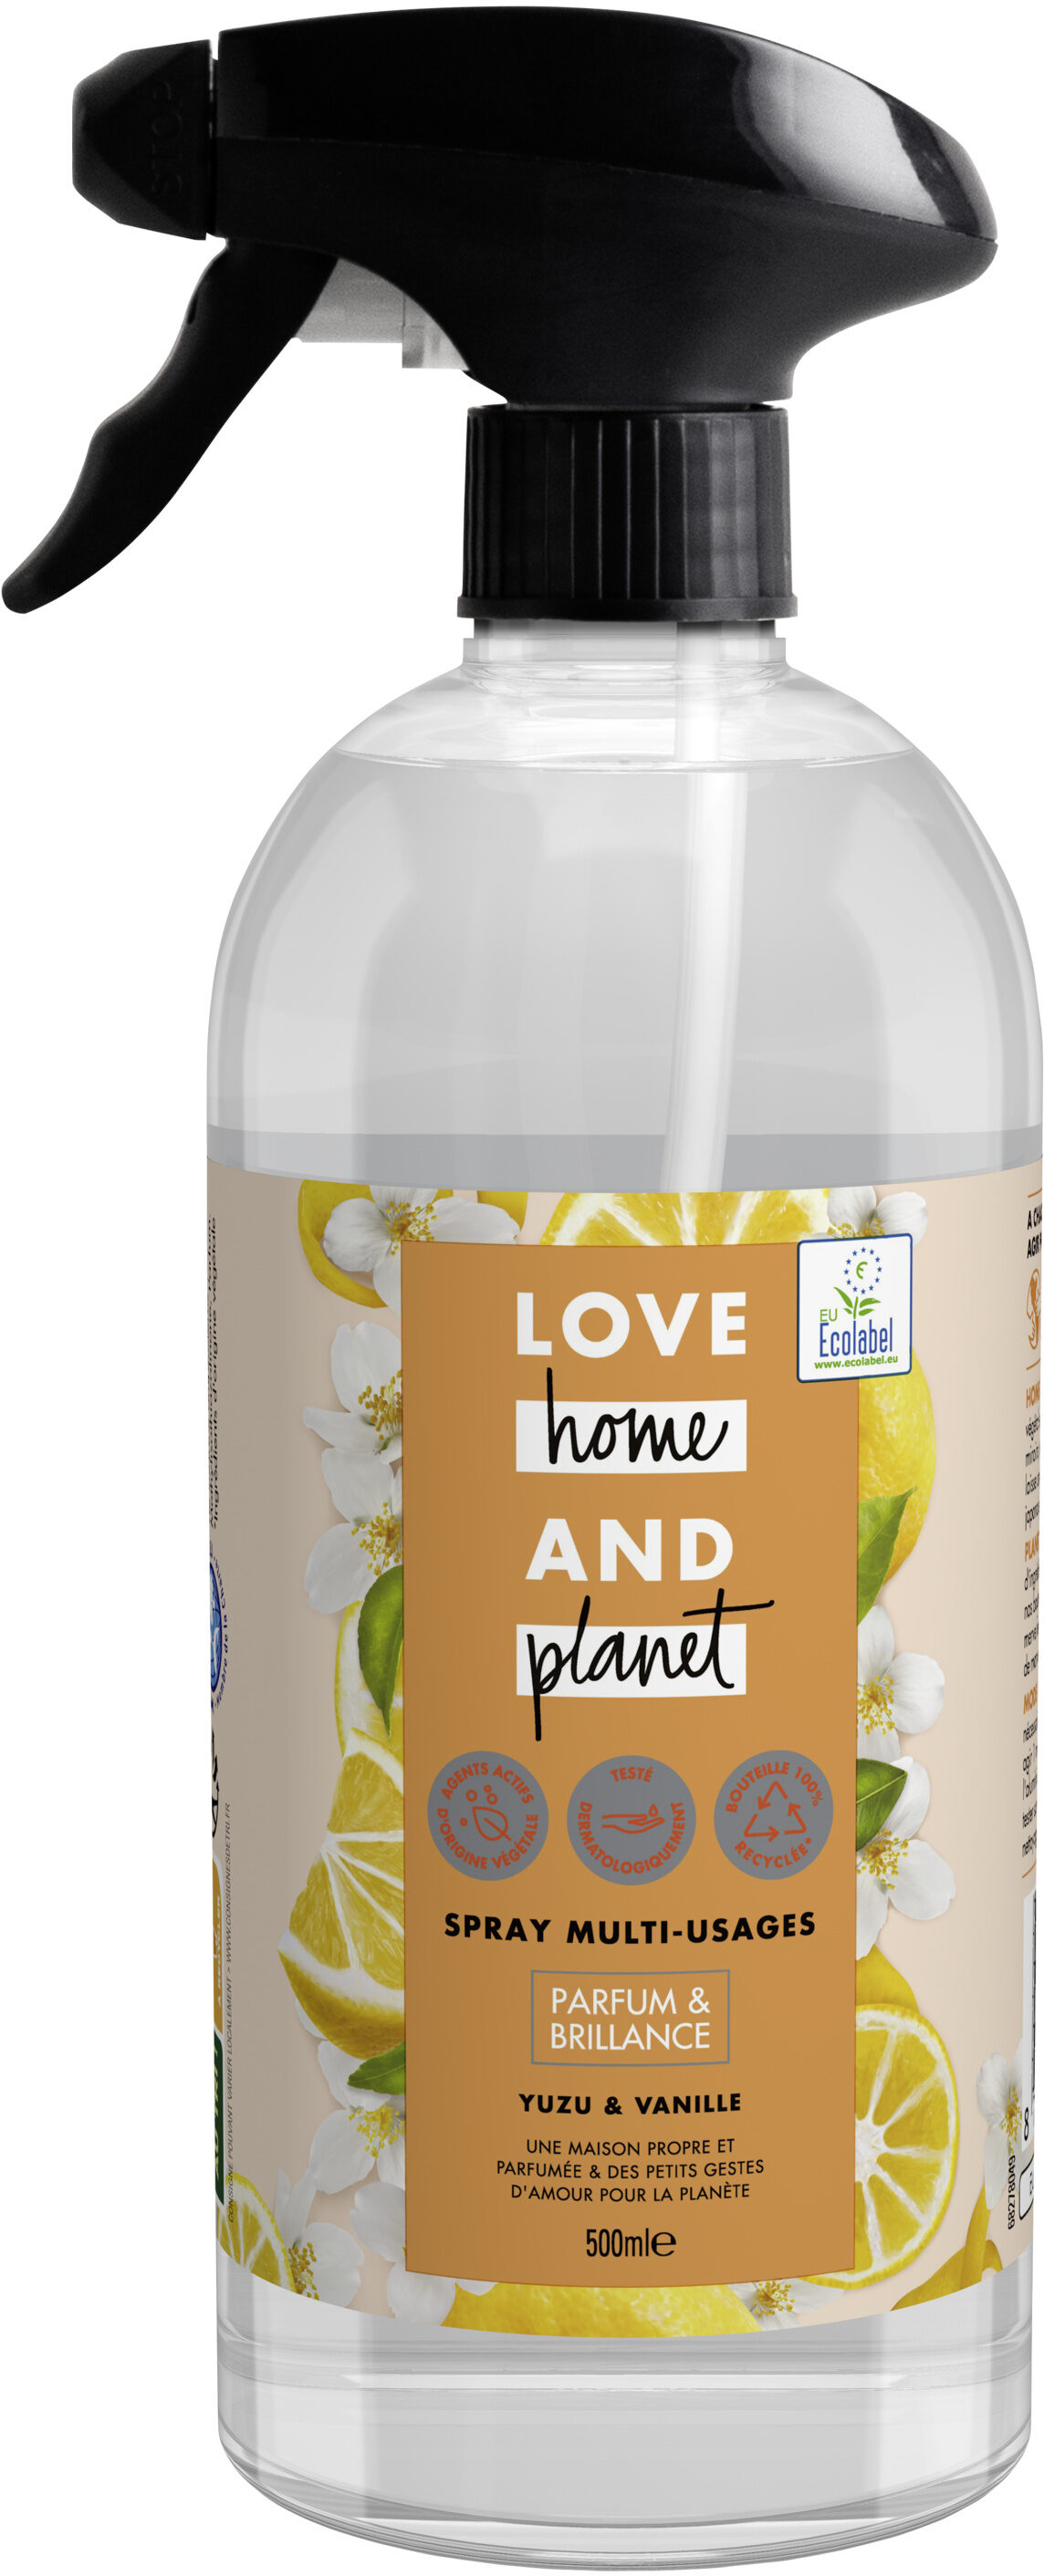 Love Home And Planet Spray Entretien Multi-Usages Yuzu & Vanille 500ml - Product - fr